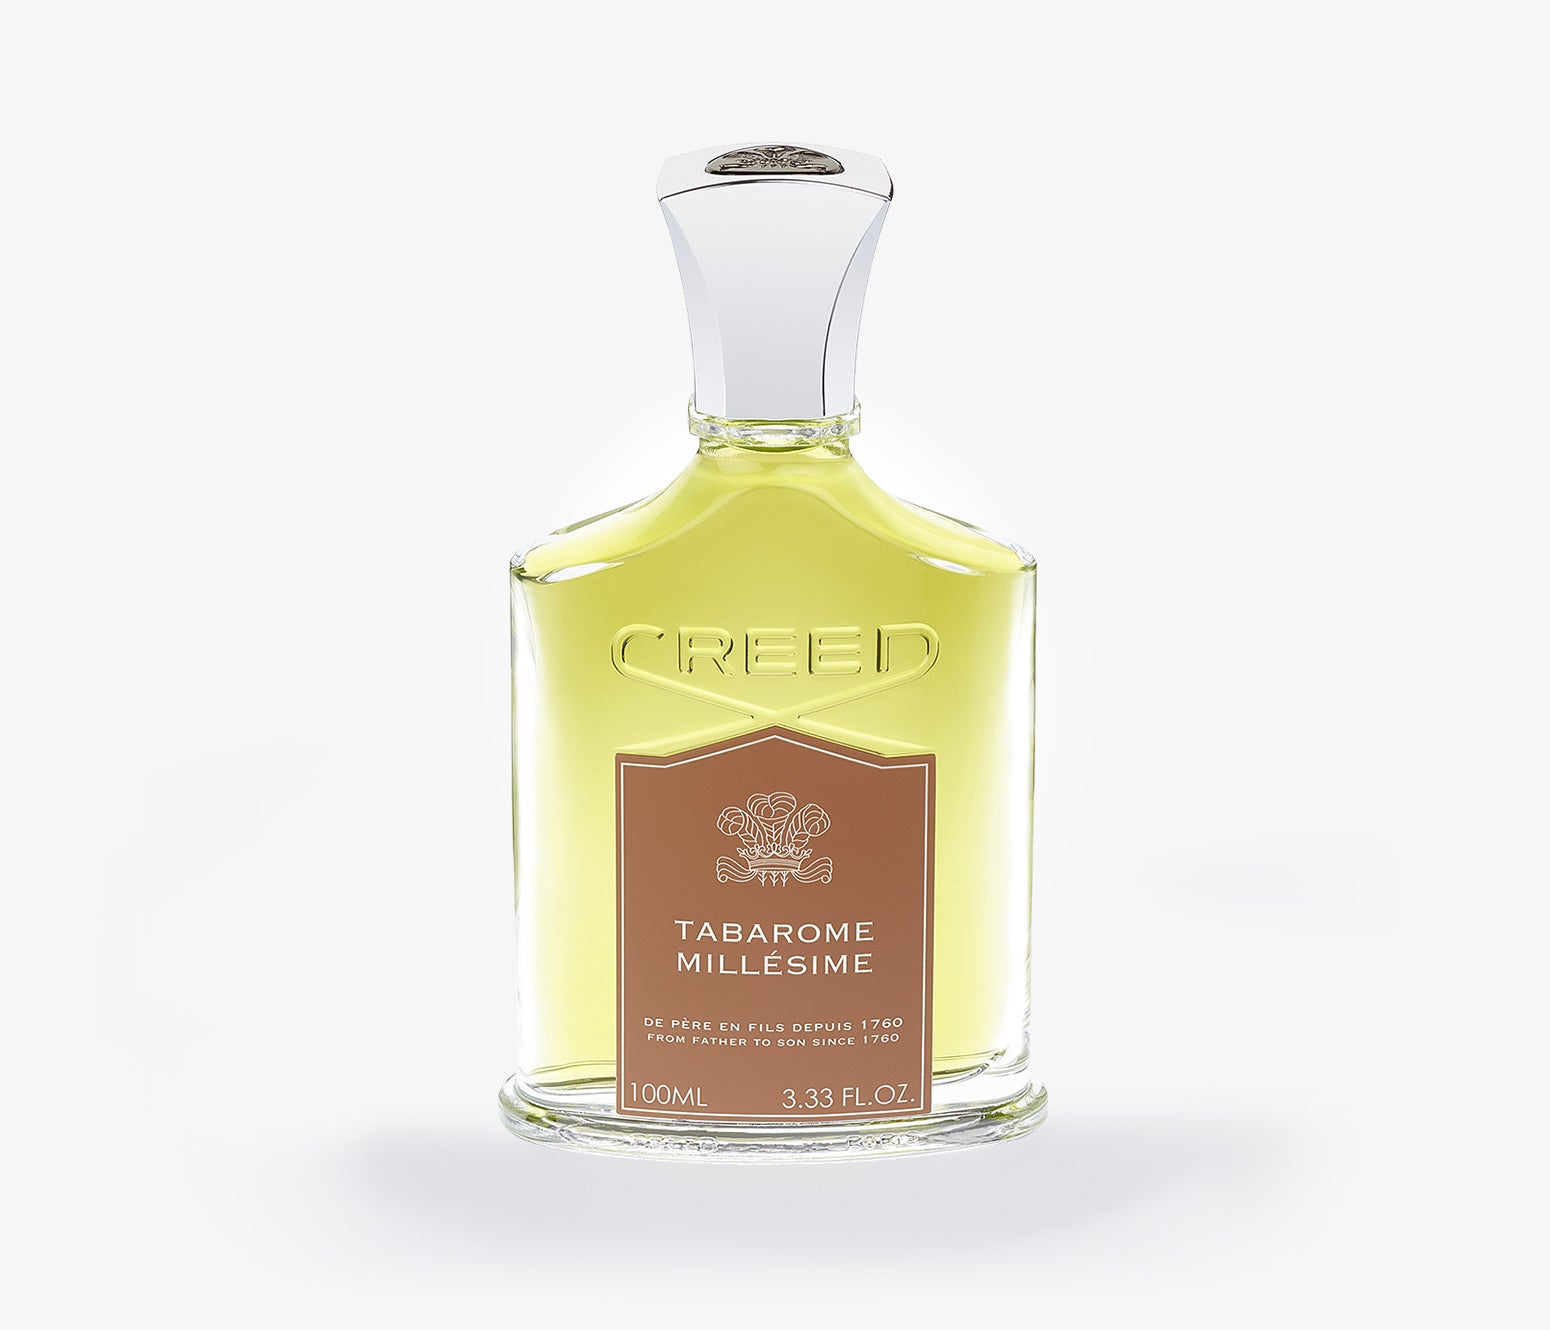 Creed - Tabarome - 50ml - '10001266 - Product Image - Fragrance - Les Senteurs